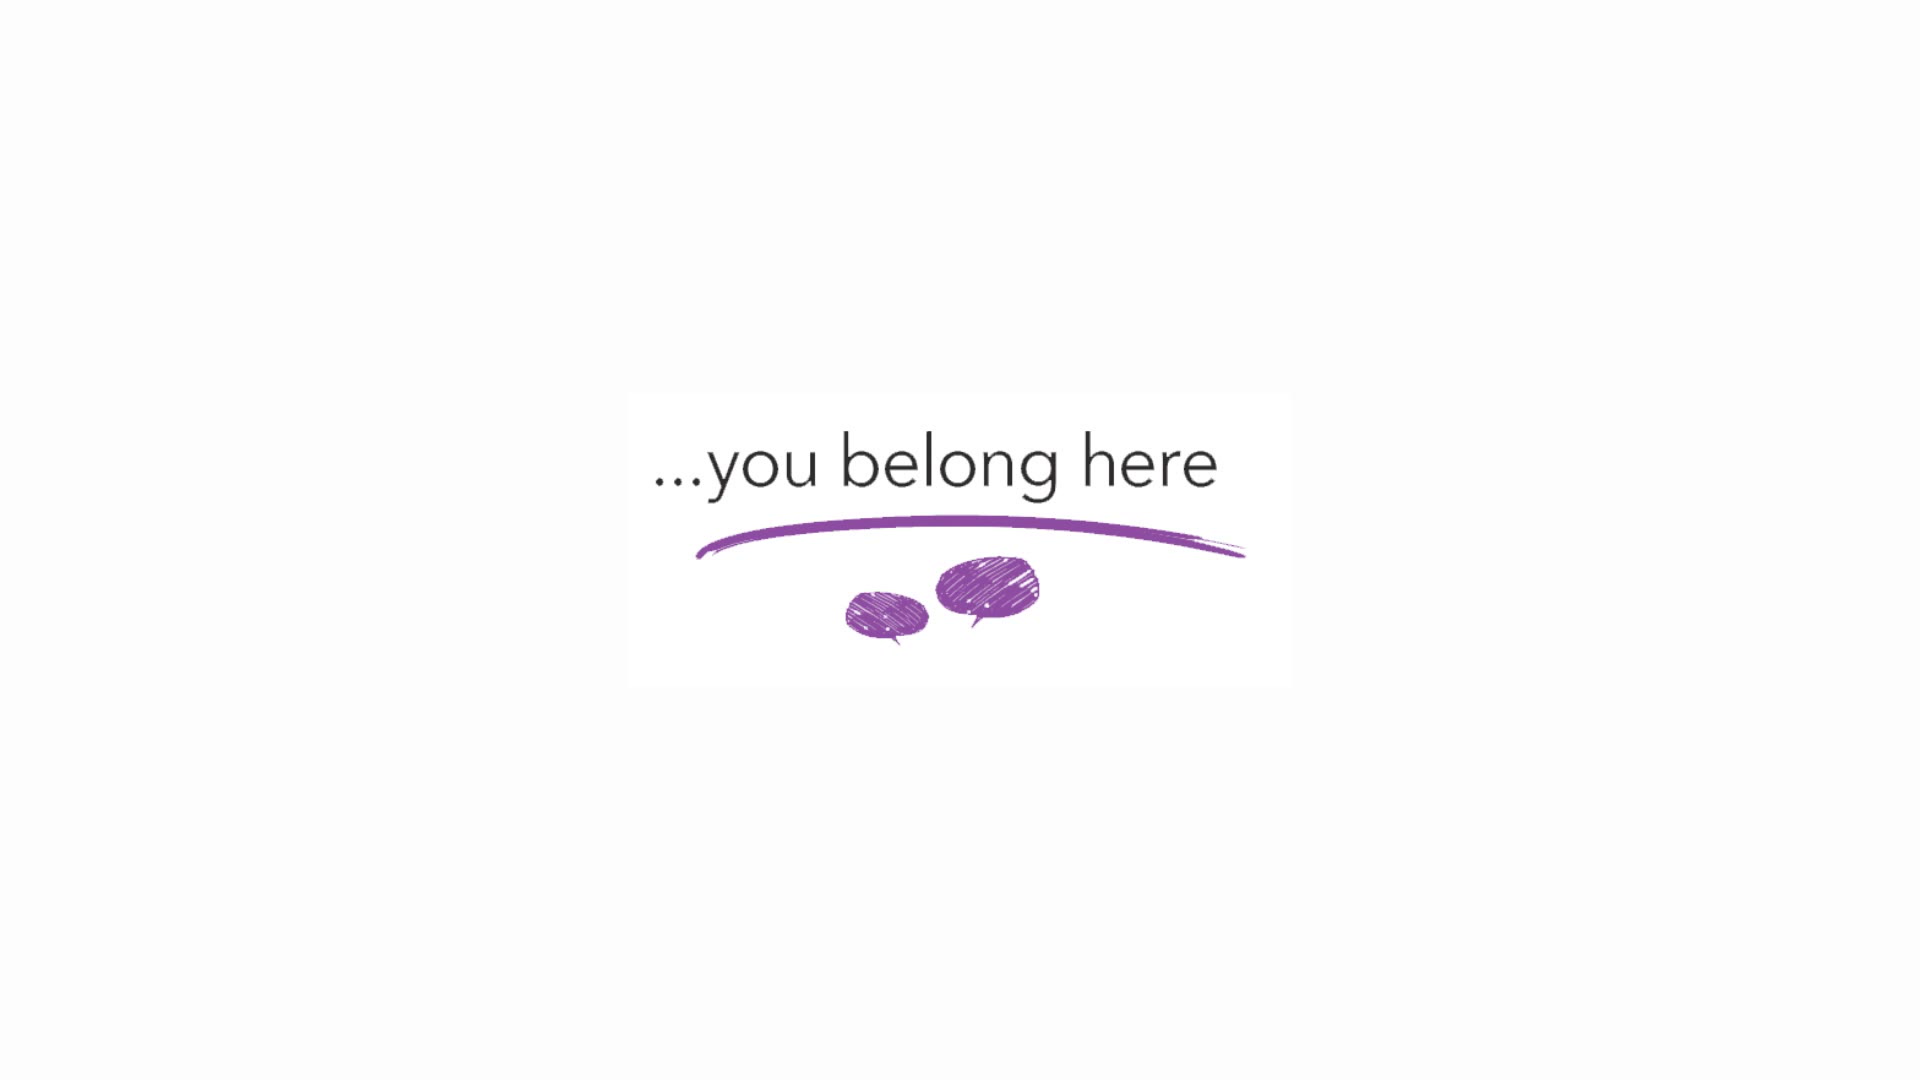 'you belong here' on white background